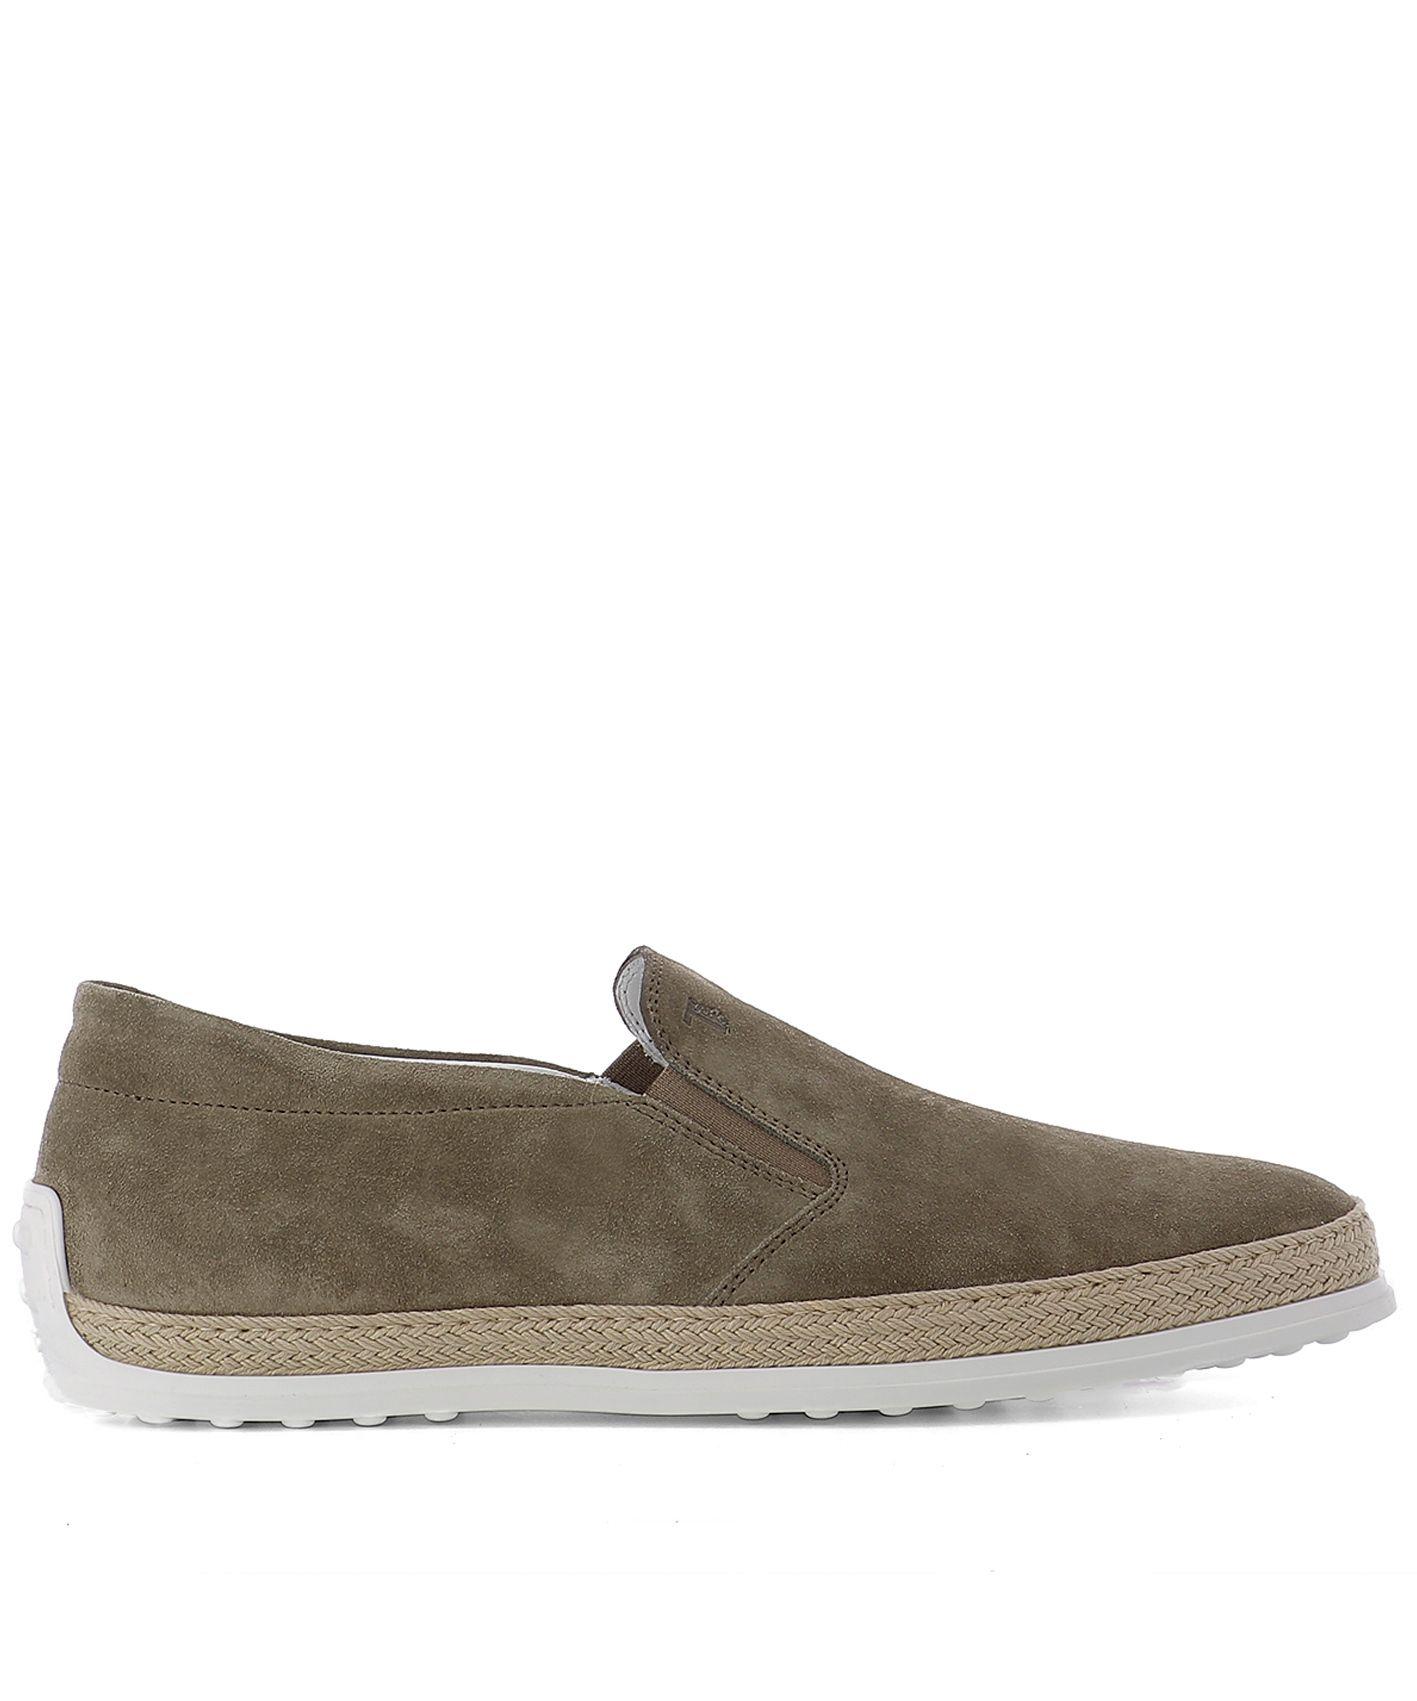 Tod's Grey Suede Slip On Sneakers in Gray for Men - Lyst